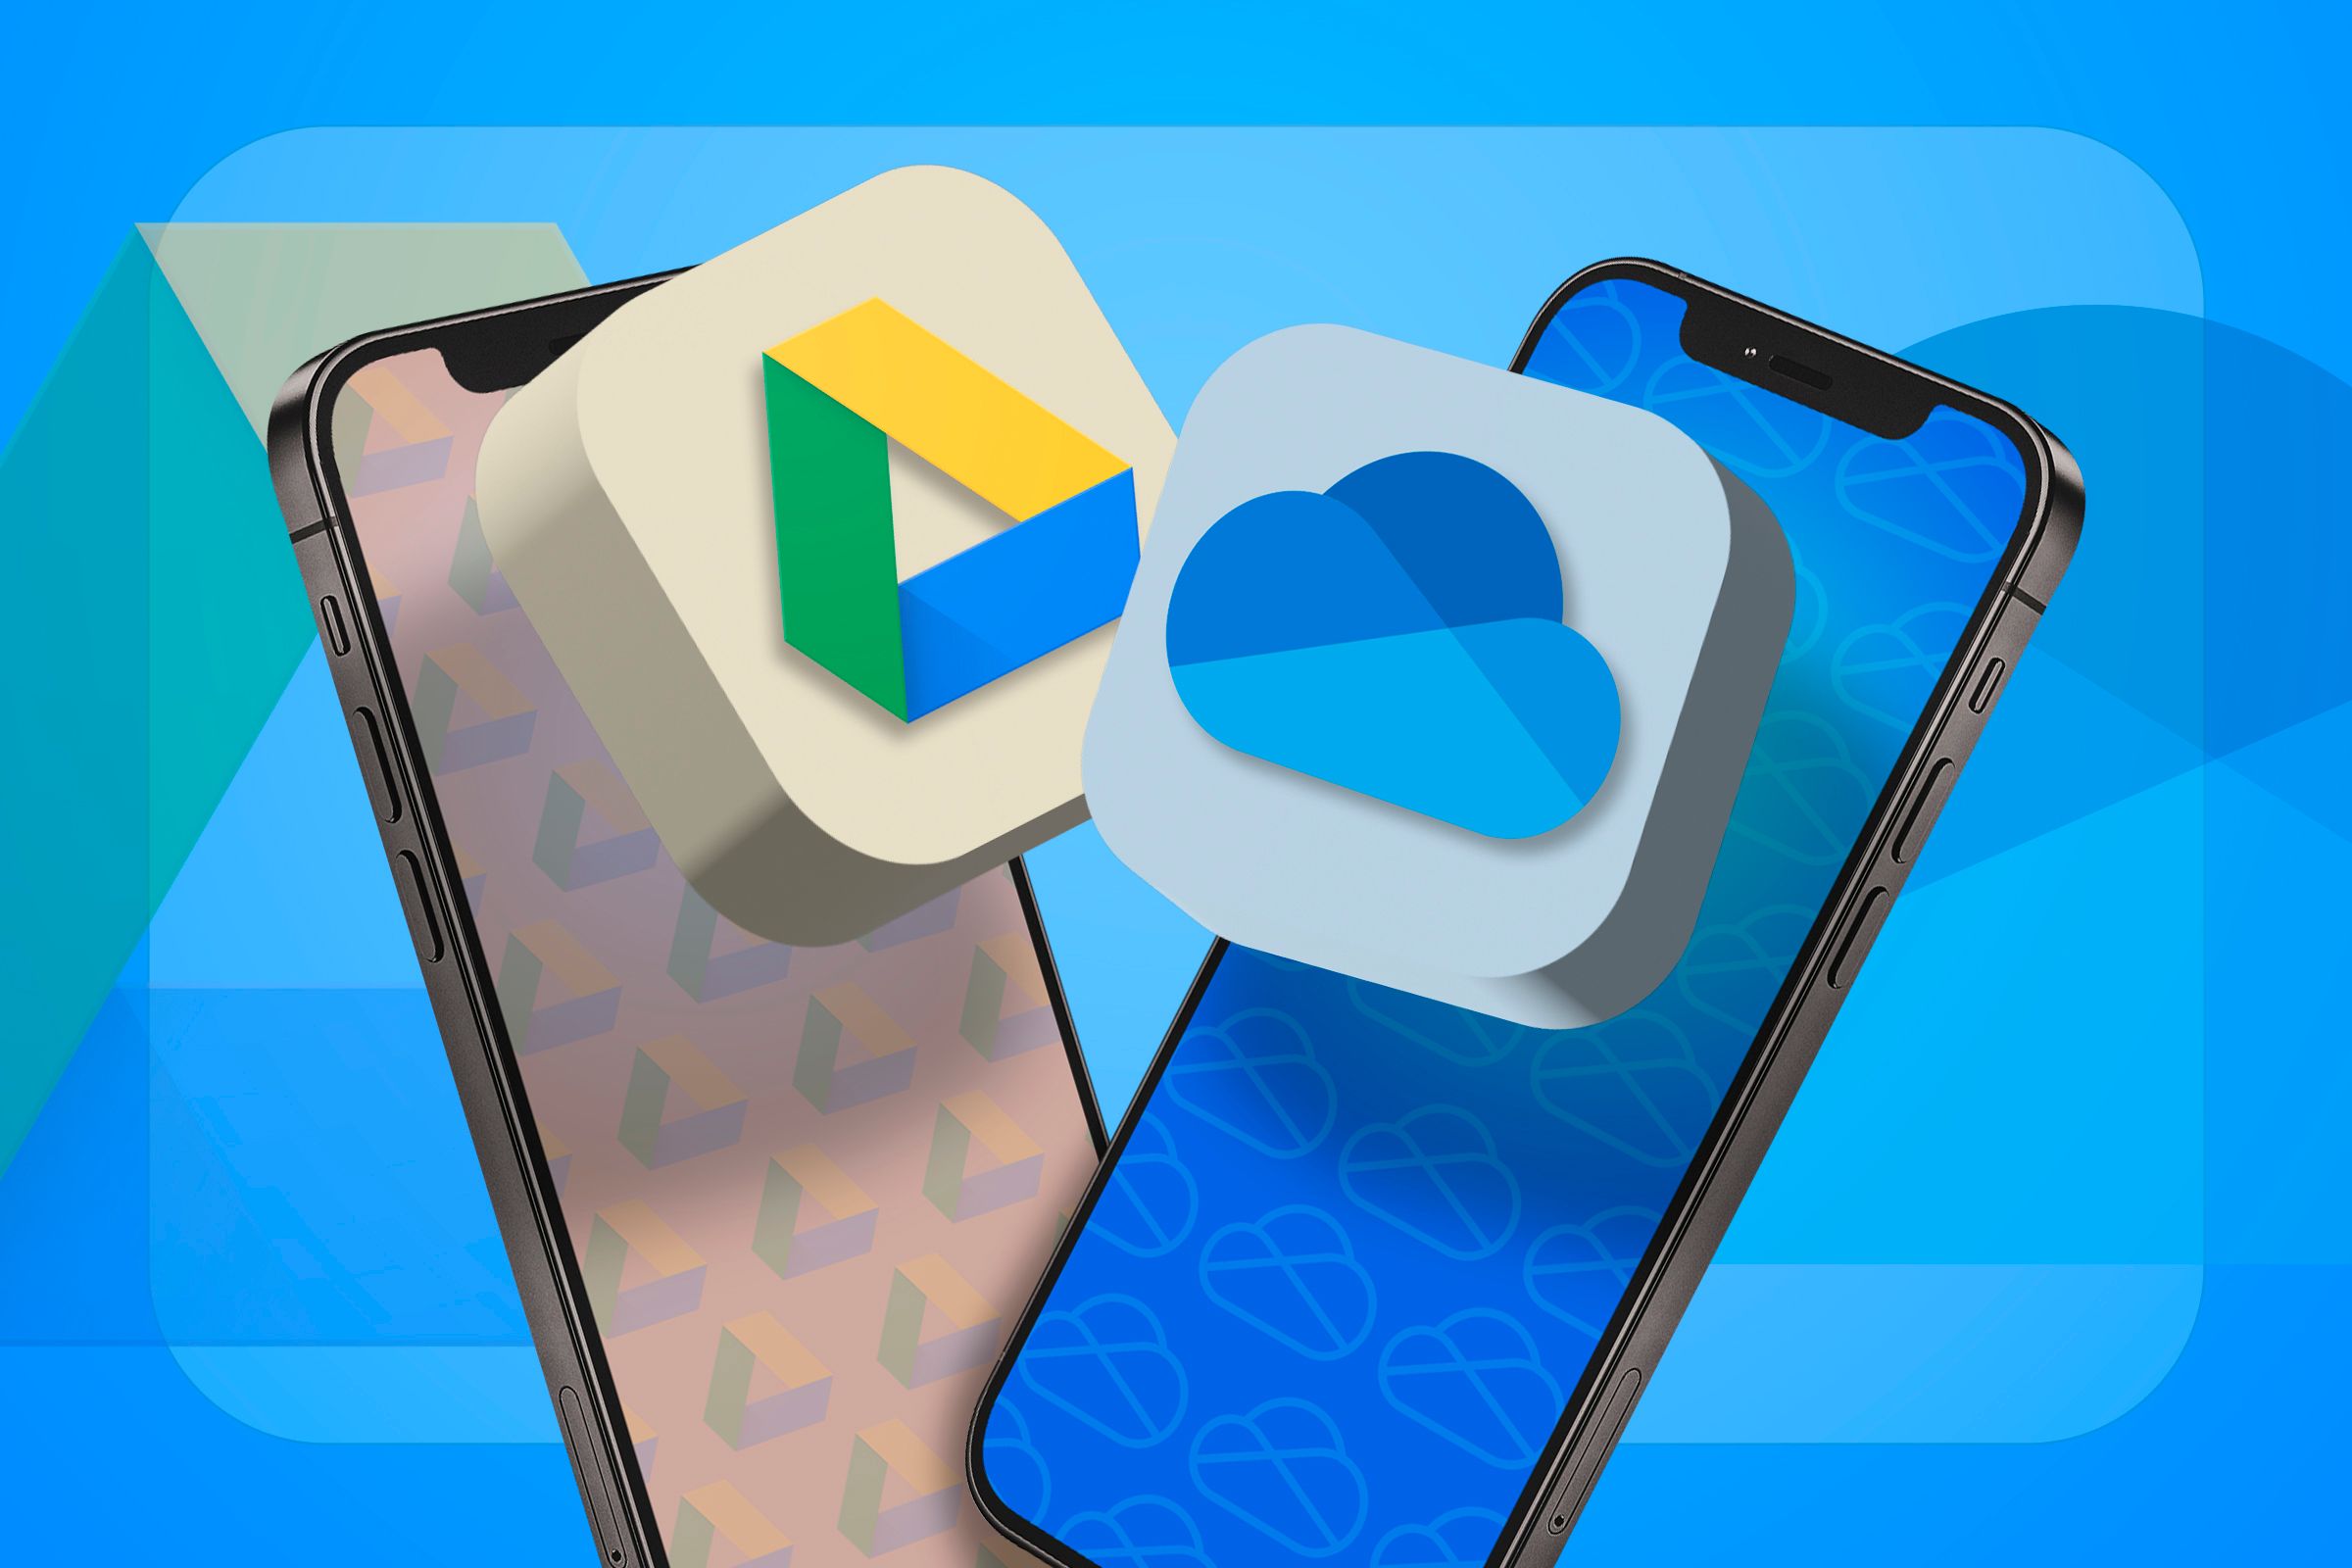 Two phones, one with Google Drive logo, the other with OneDrive logo.-1